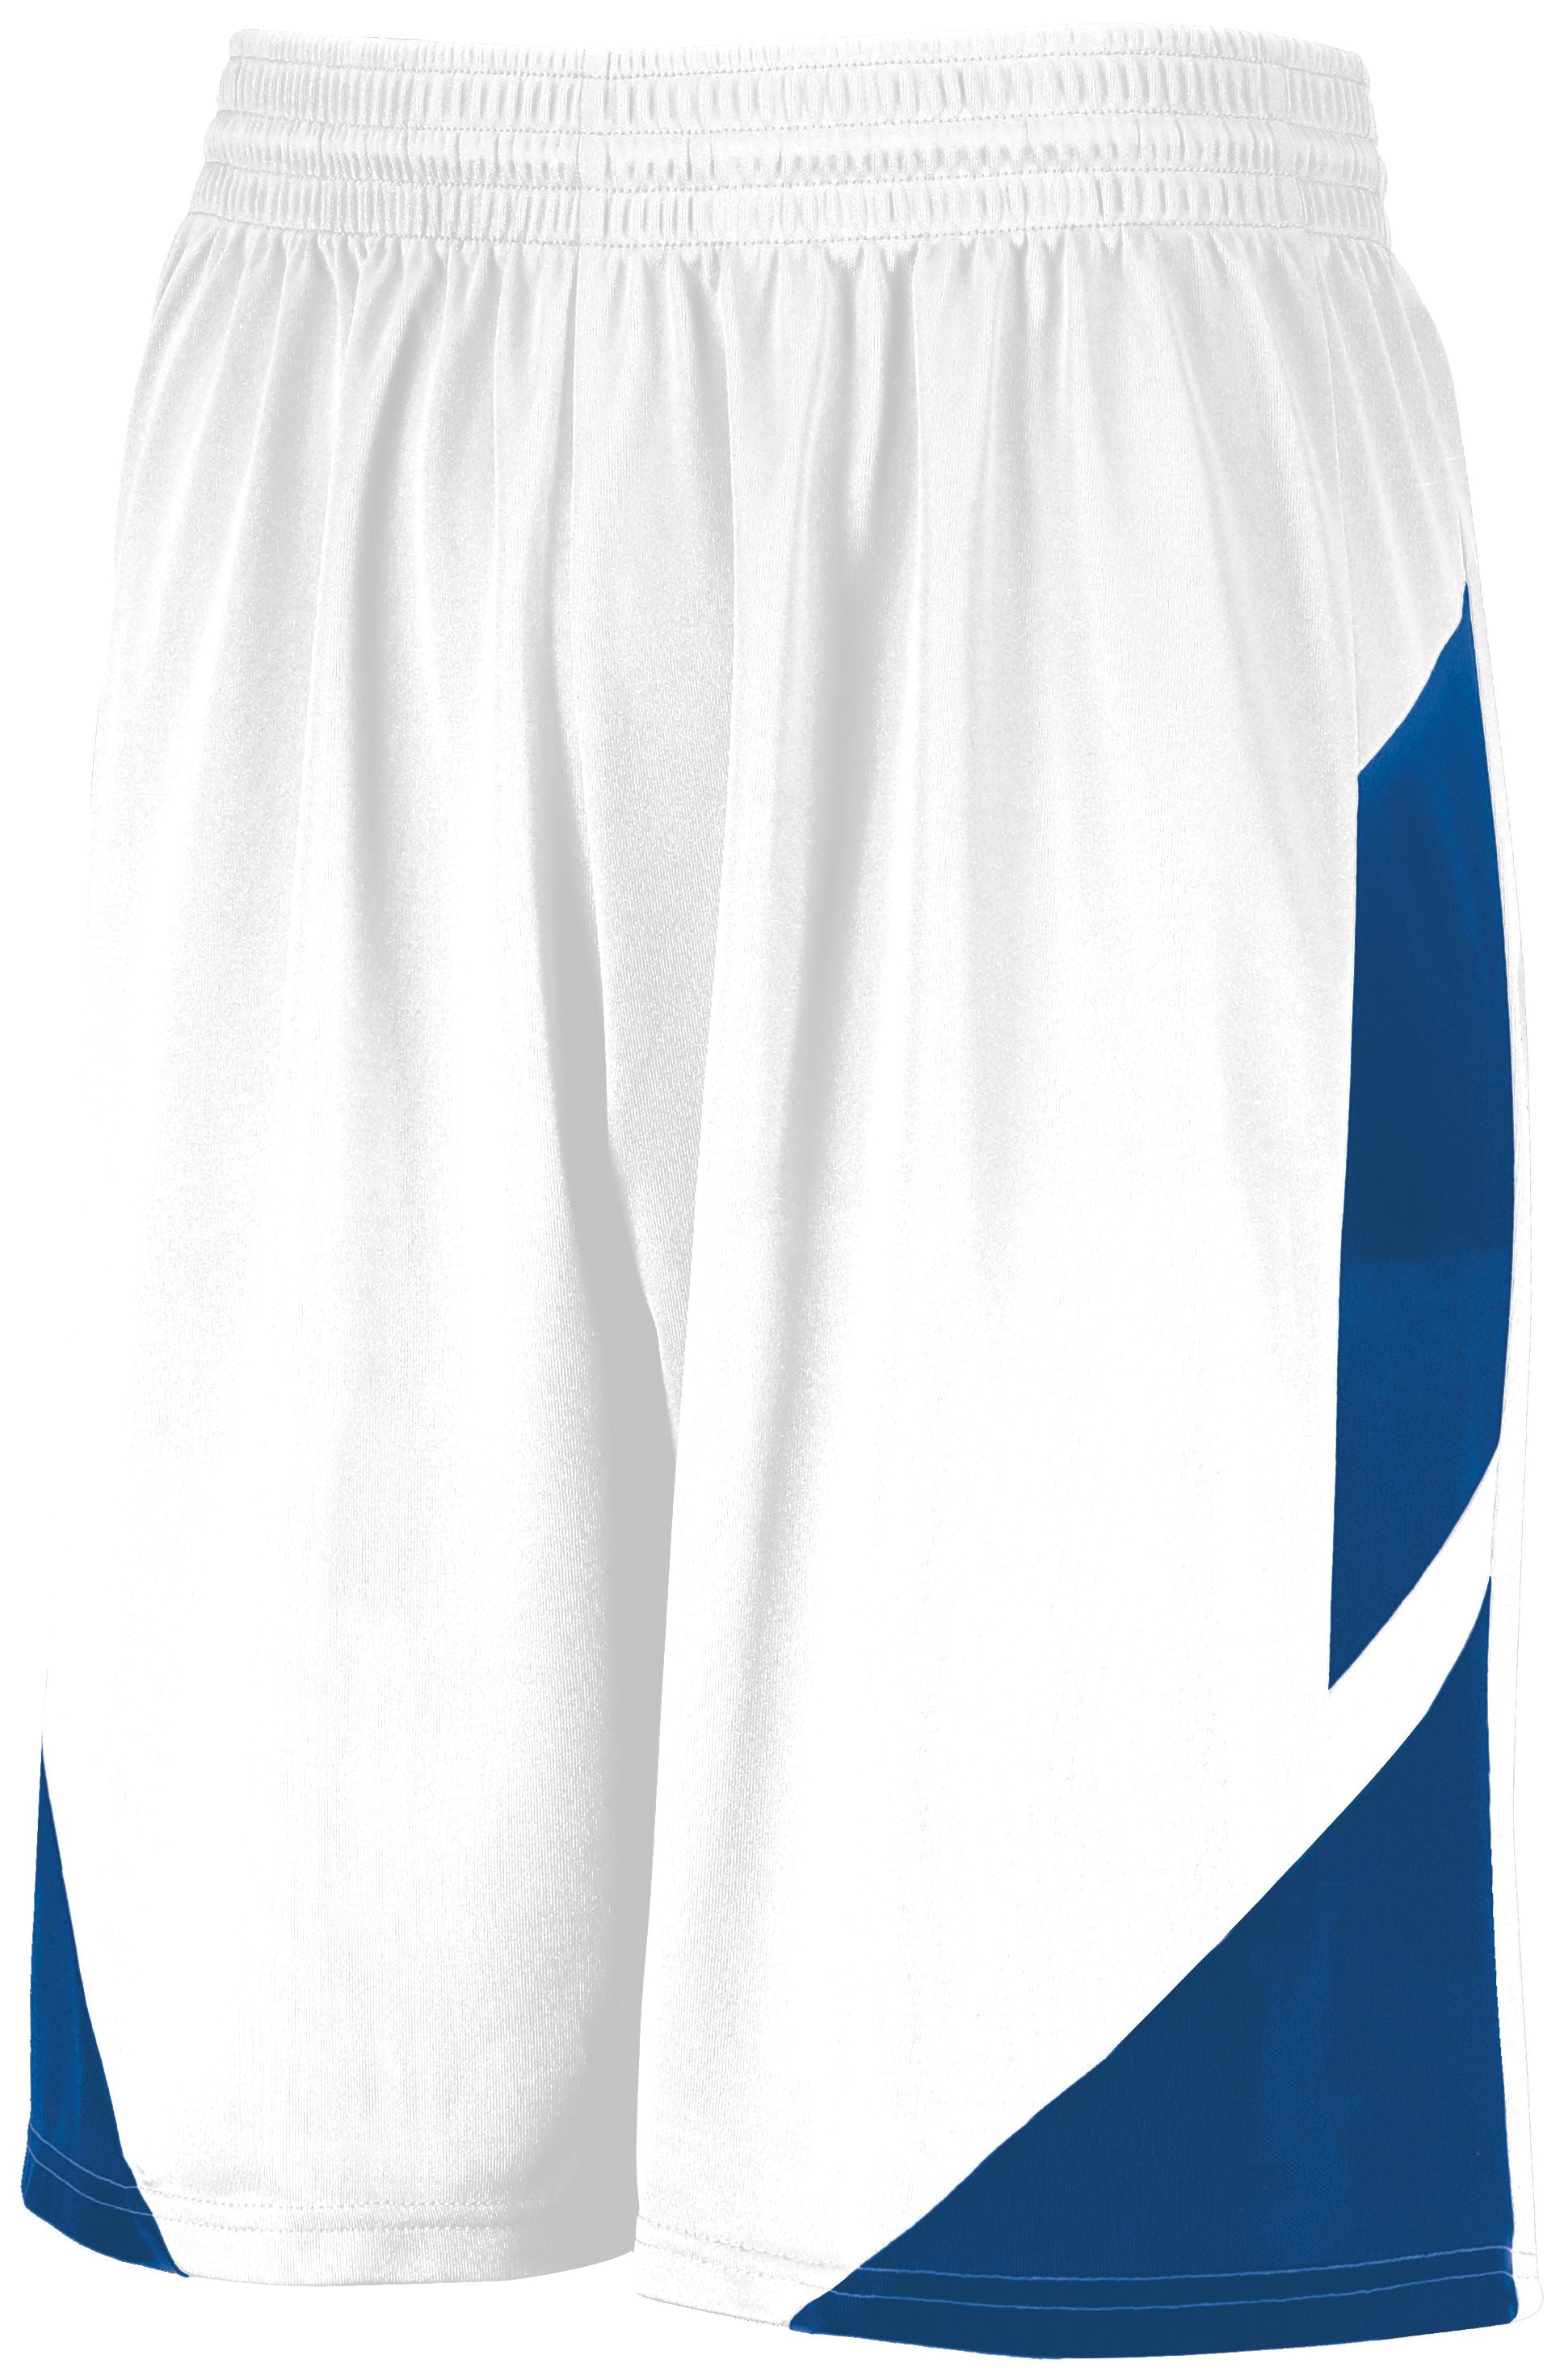 Augusta Sportswear Step-Back Basketball Shorts in White/Royal  -Part of the Adult, Adult-Shorts, Augusta-Products, Basketball, All-Sports, All-Sports-1 product lines at KanaleyCreations.com